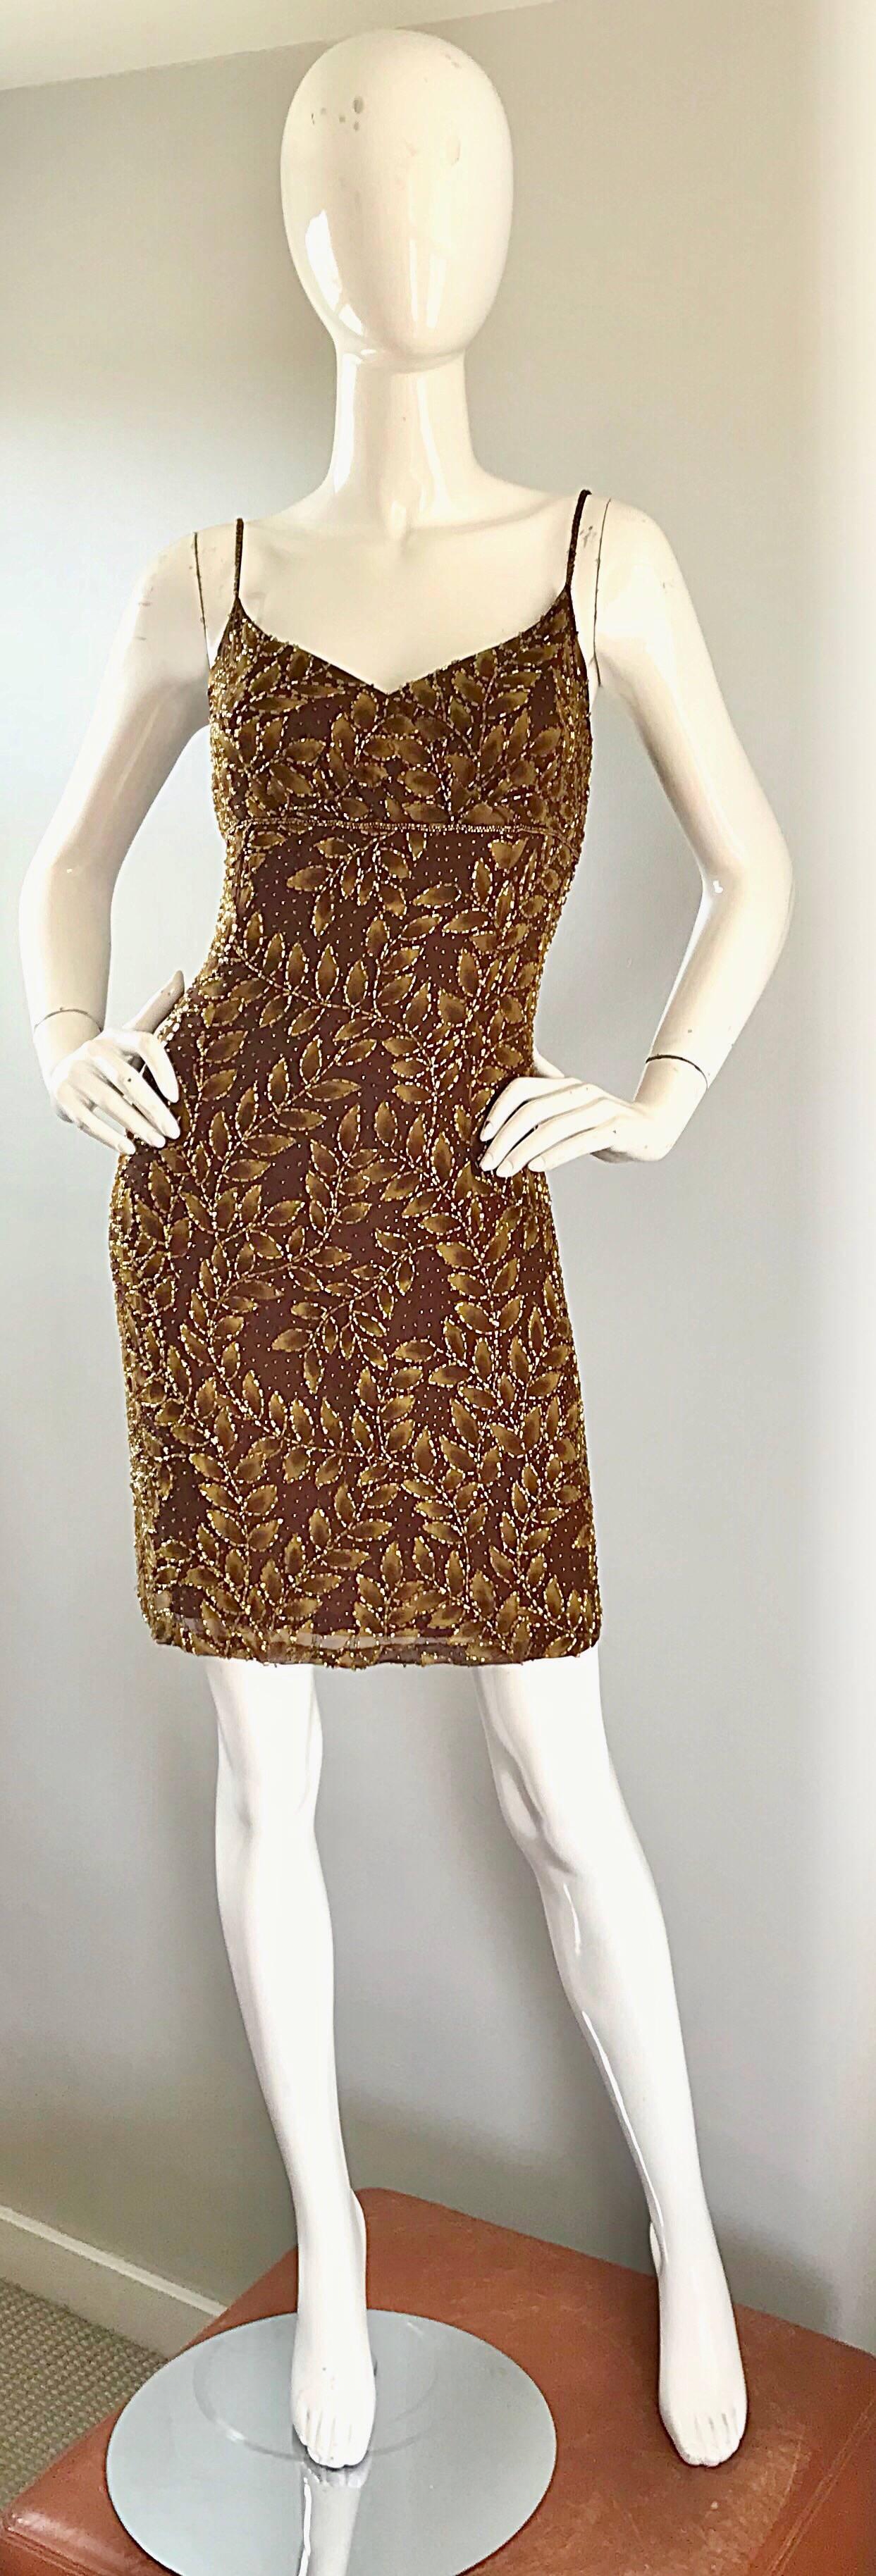 Beautiful vintage OLEG CASSINI brown, gold and bronze sleeveless silk beaded 'leaf' print cocktail dress! Features thousands of gold beads throughout. Hidden zipper up the back with hook-and-eye closure. Fully lined. Very flattering fit. Great